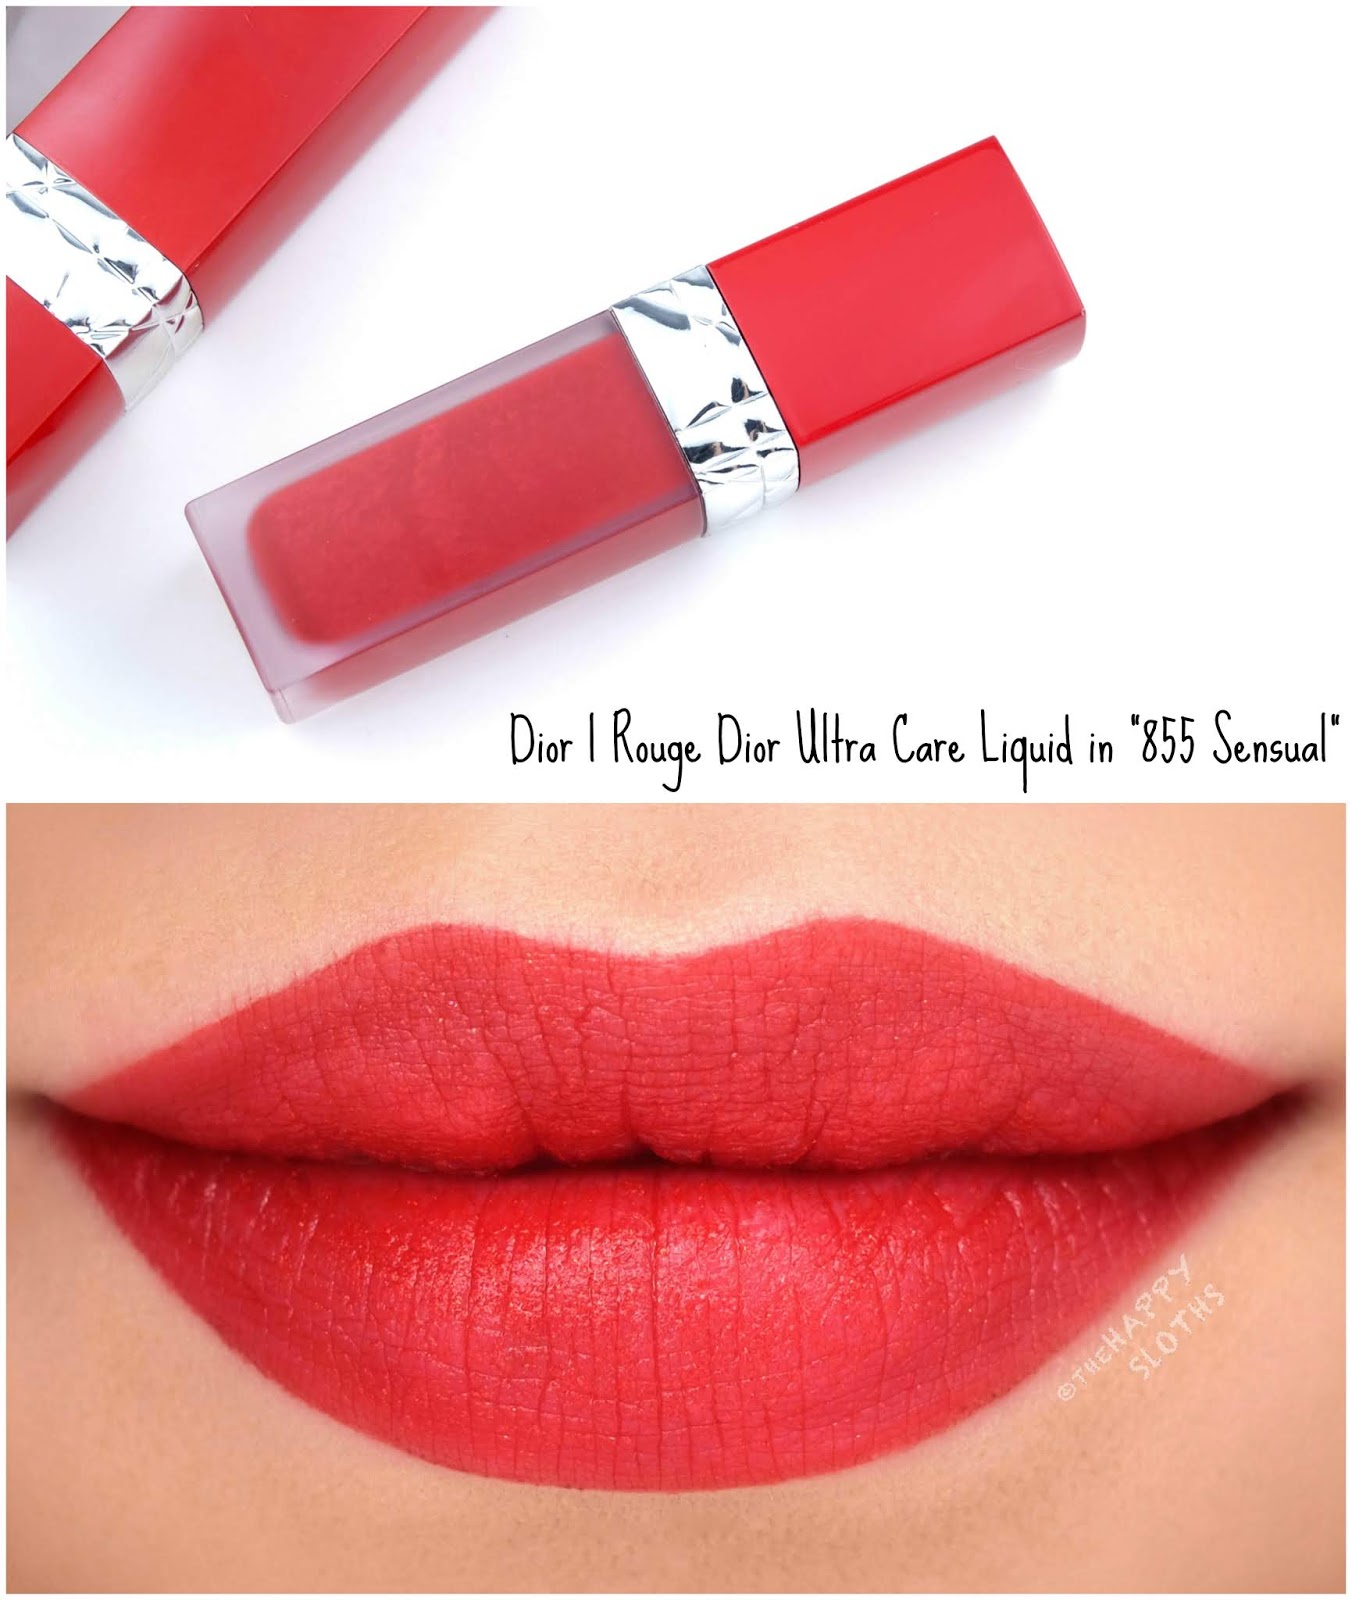 Dior | Rouge Dior Ultra Care Liquid Lipstick in "855 Sensual": Review and Swatches